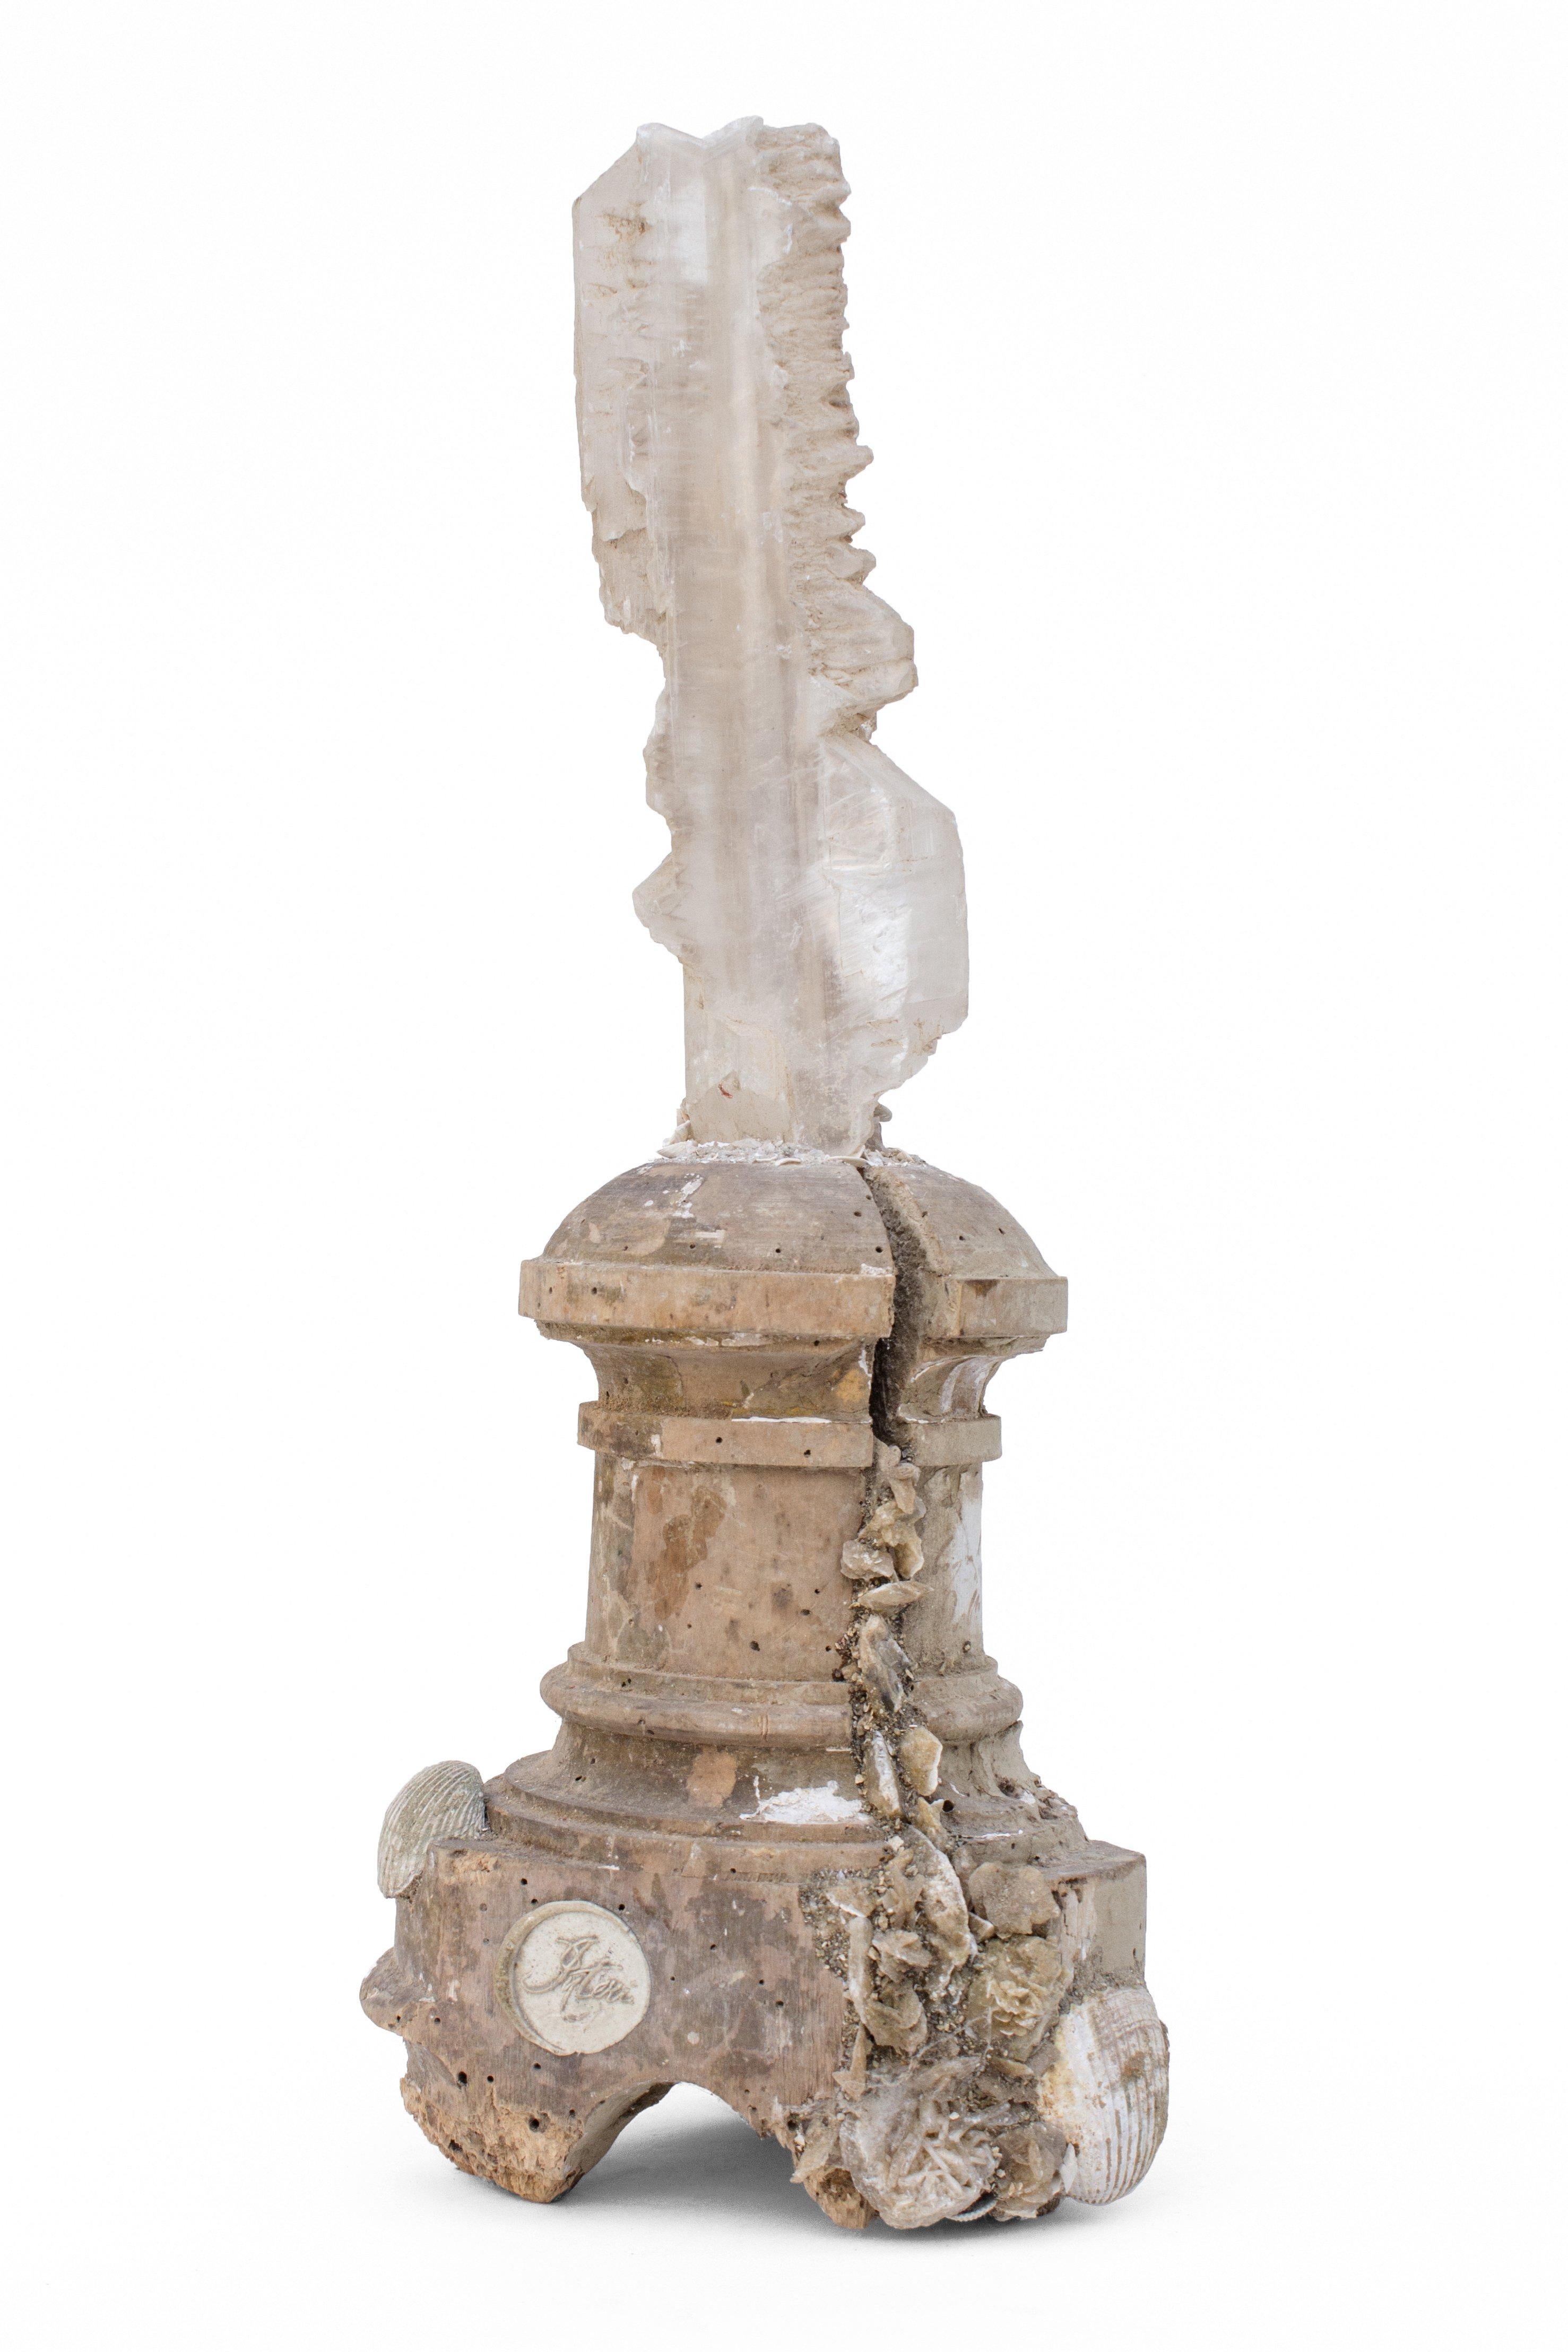 Rock Crystal 17th Century Italian Candlestick with a Selenite Blade Cluster and Fossil Shells